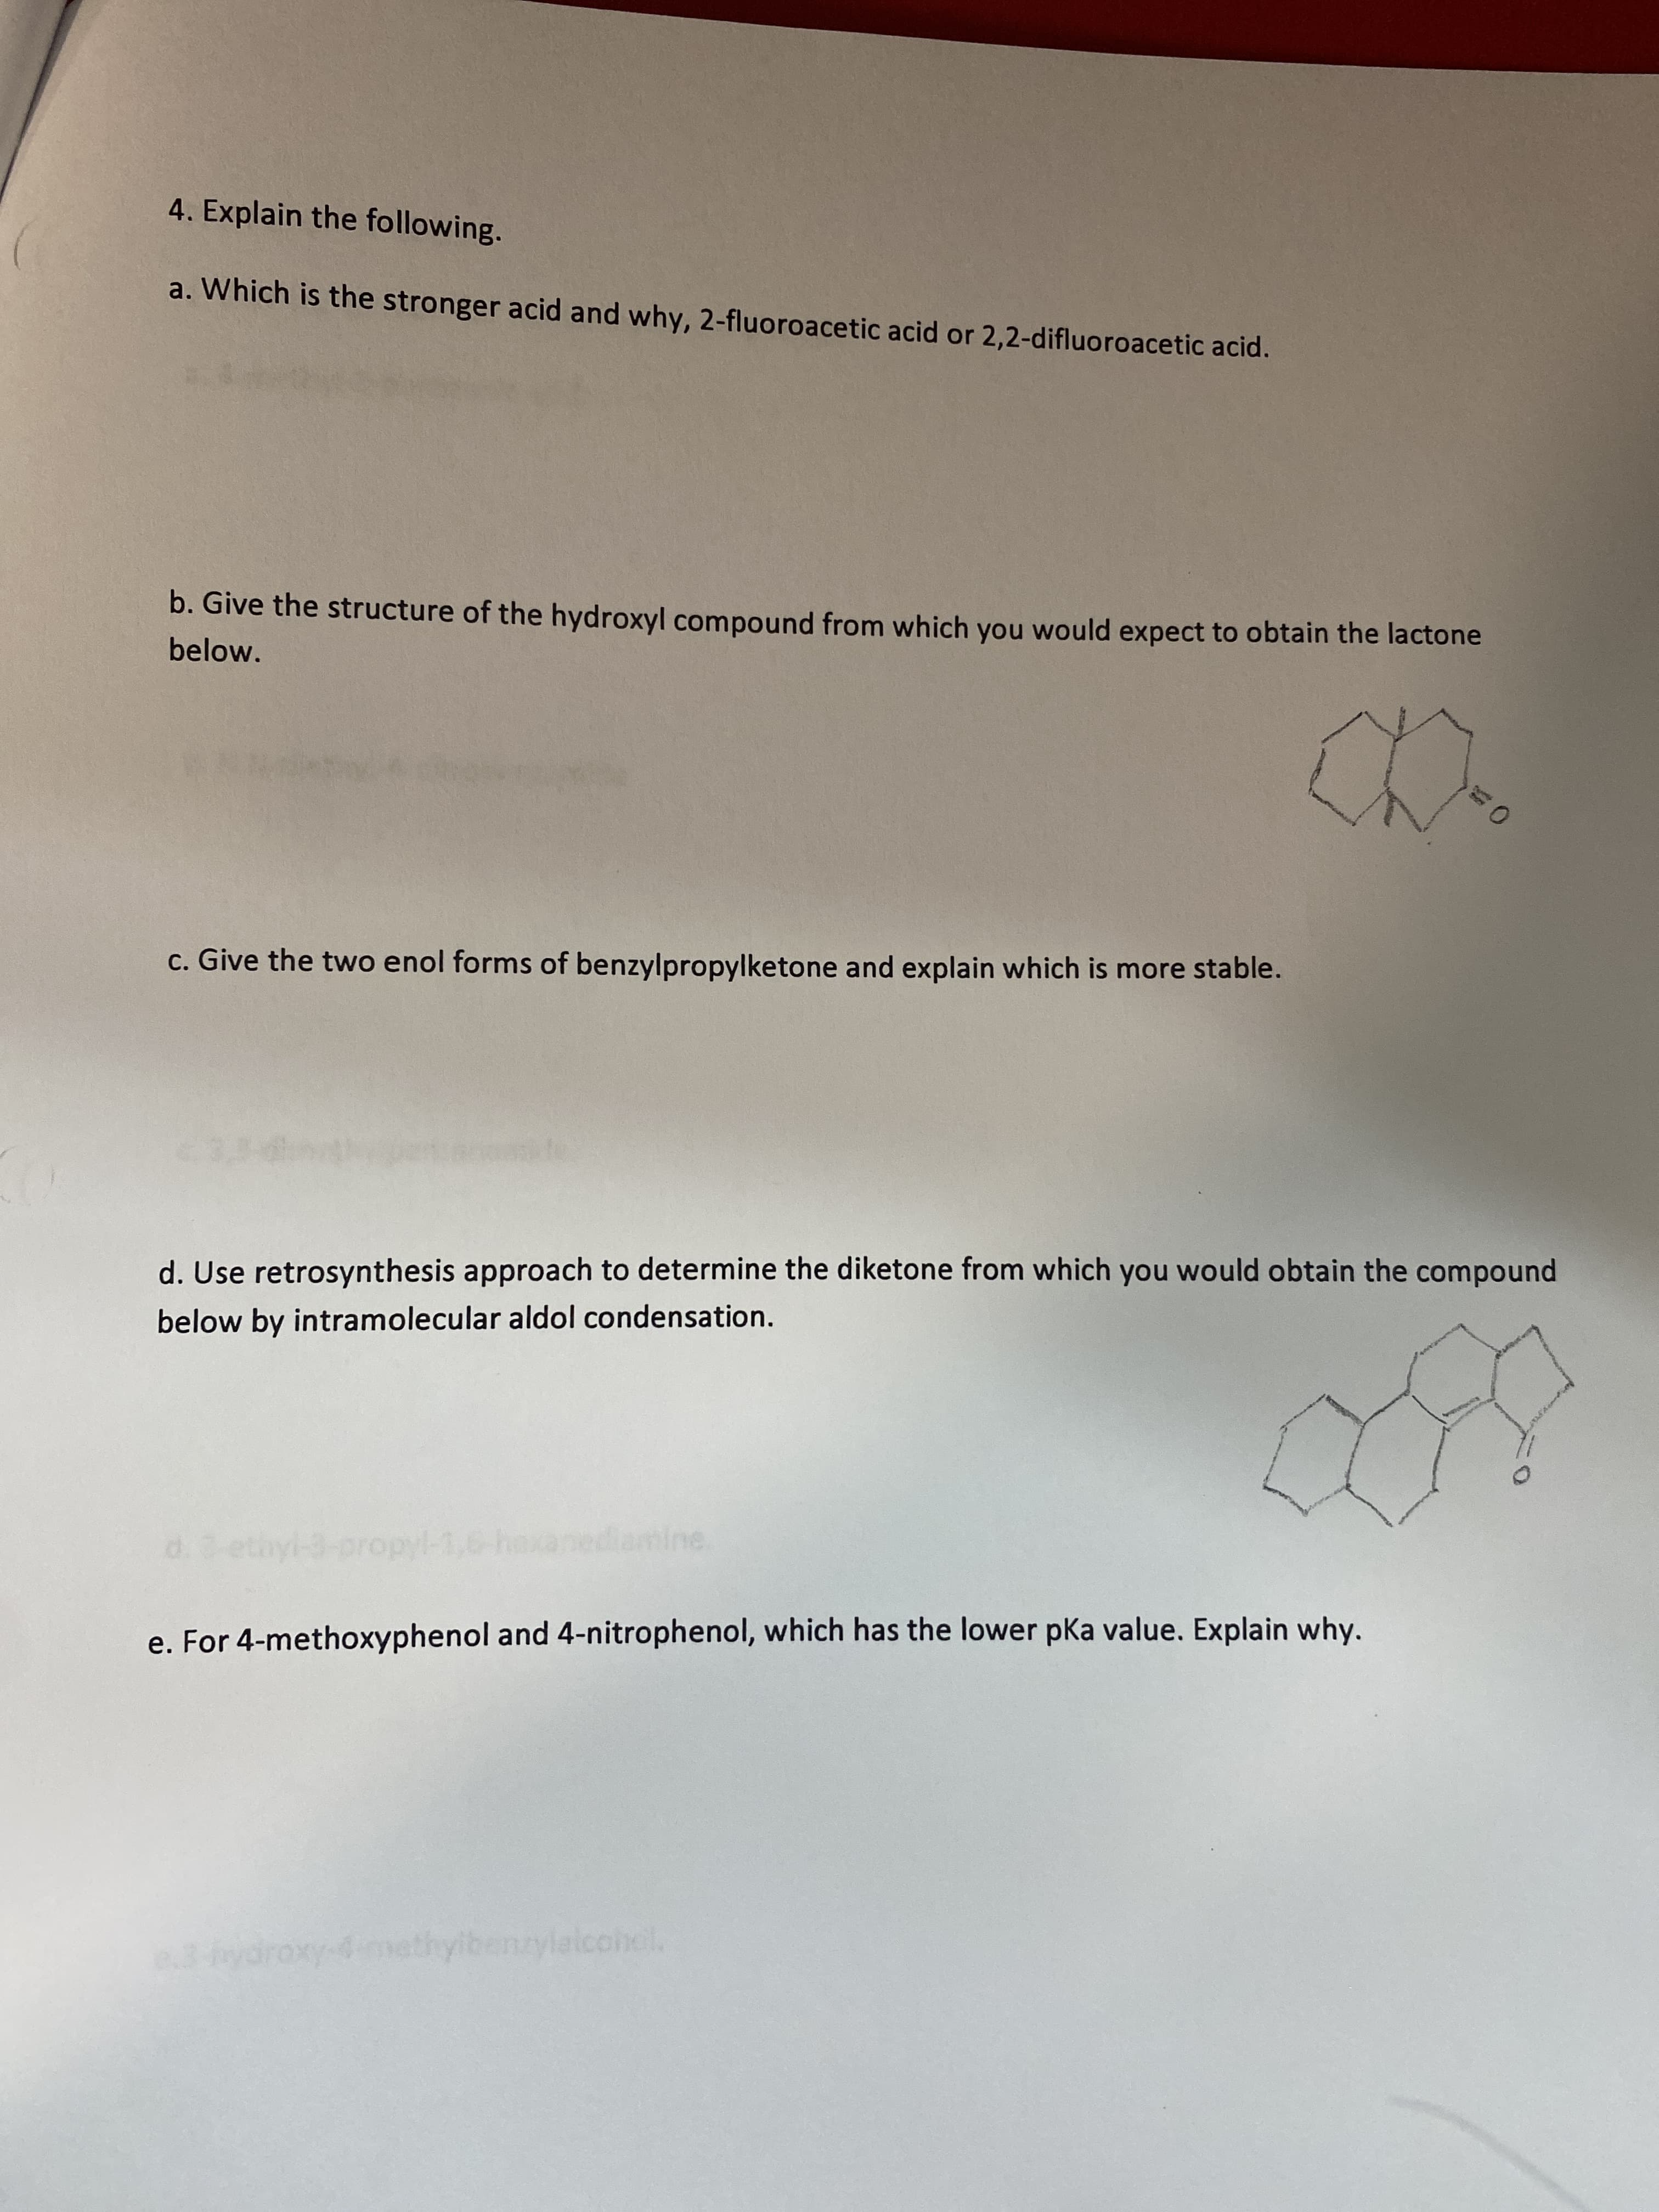 4. Explain the following.
a. Which is the stronger acid and why, 2-fluoroacetic acid or 2,2-difluoroacetic acid.
b. Give the structure of the hydroxyl compound from which you would expect to obtain the lactone
